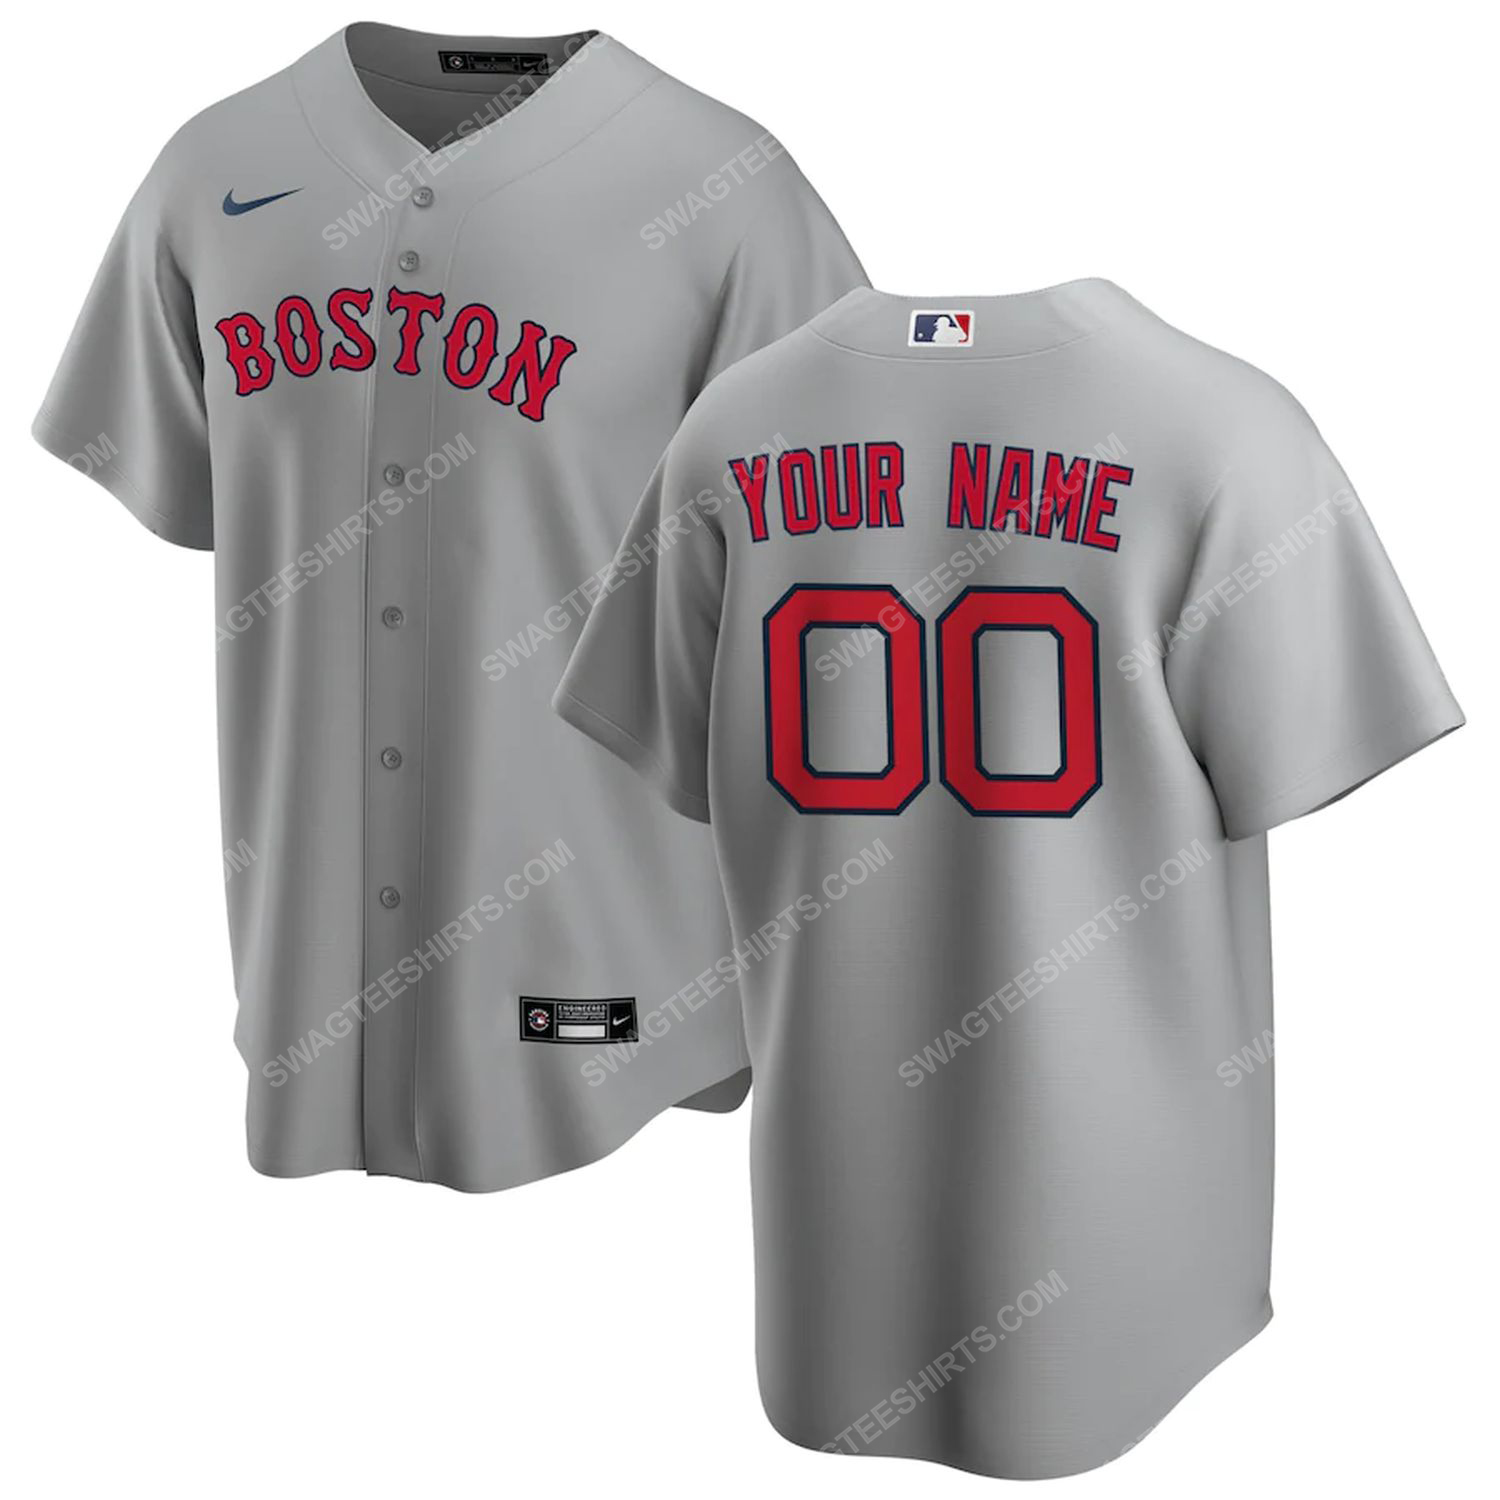 [special edition] Personalized mlb boston red sox team baseball jersey – maria